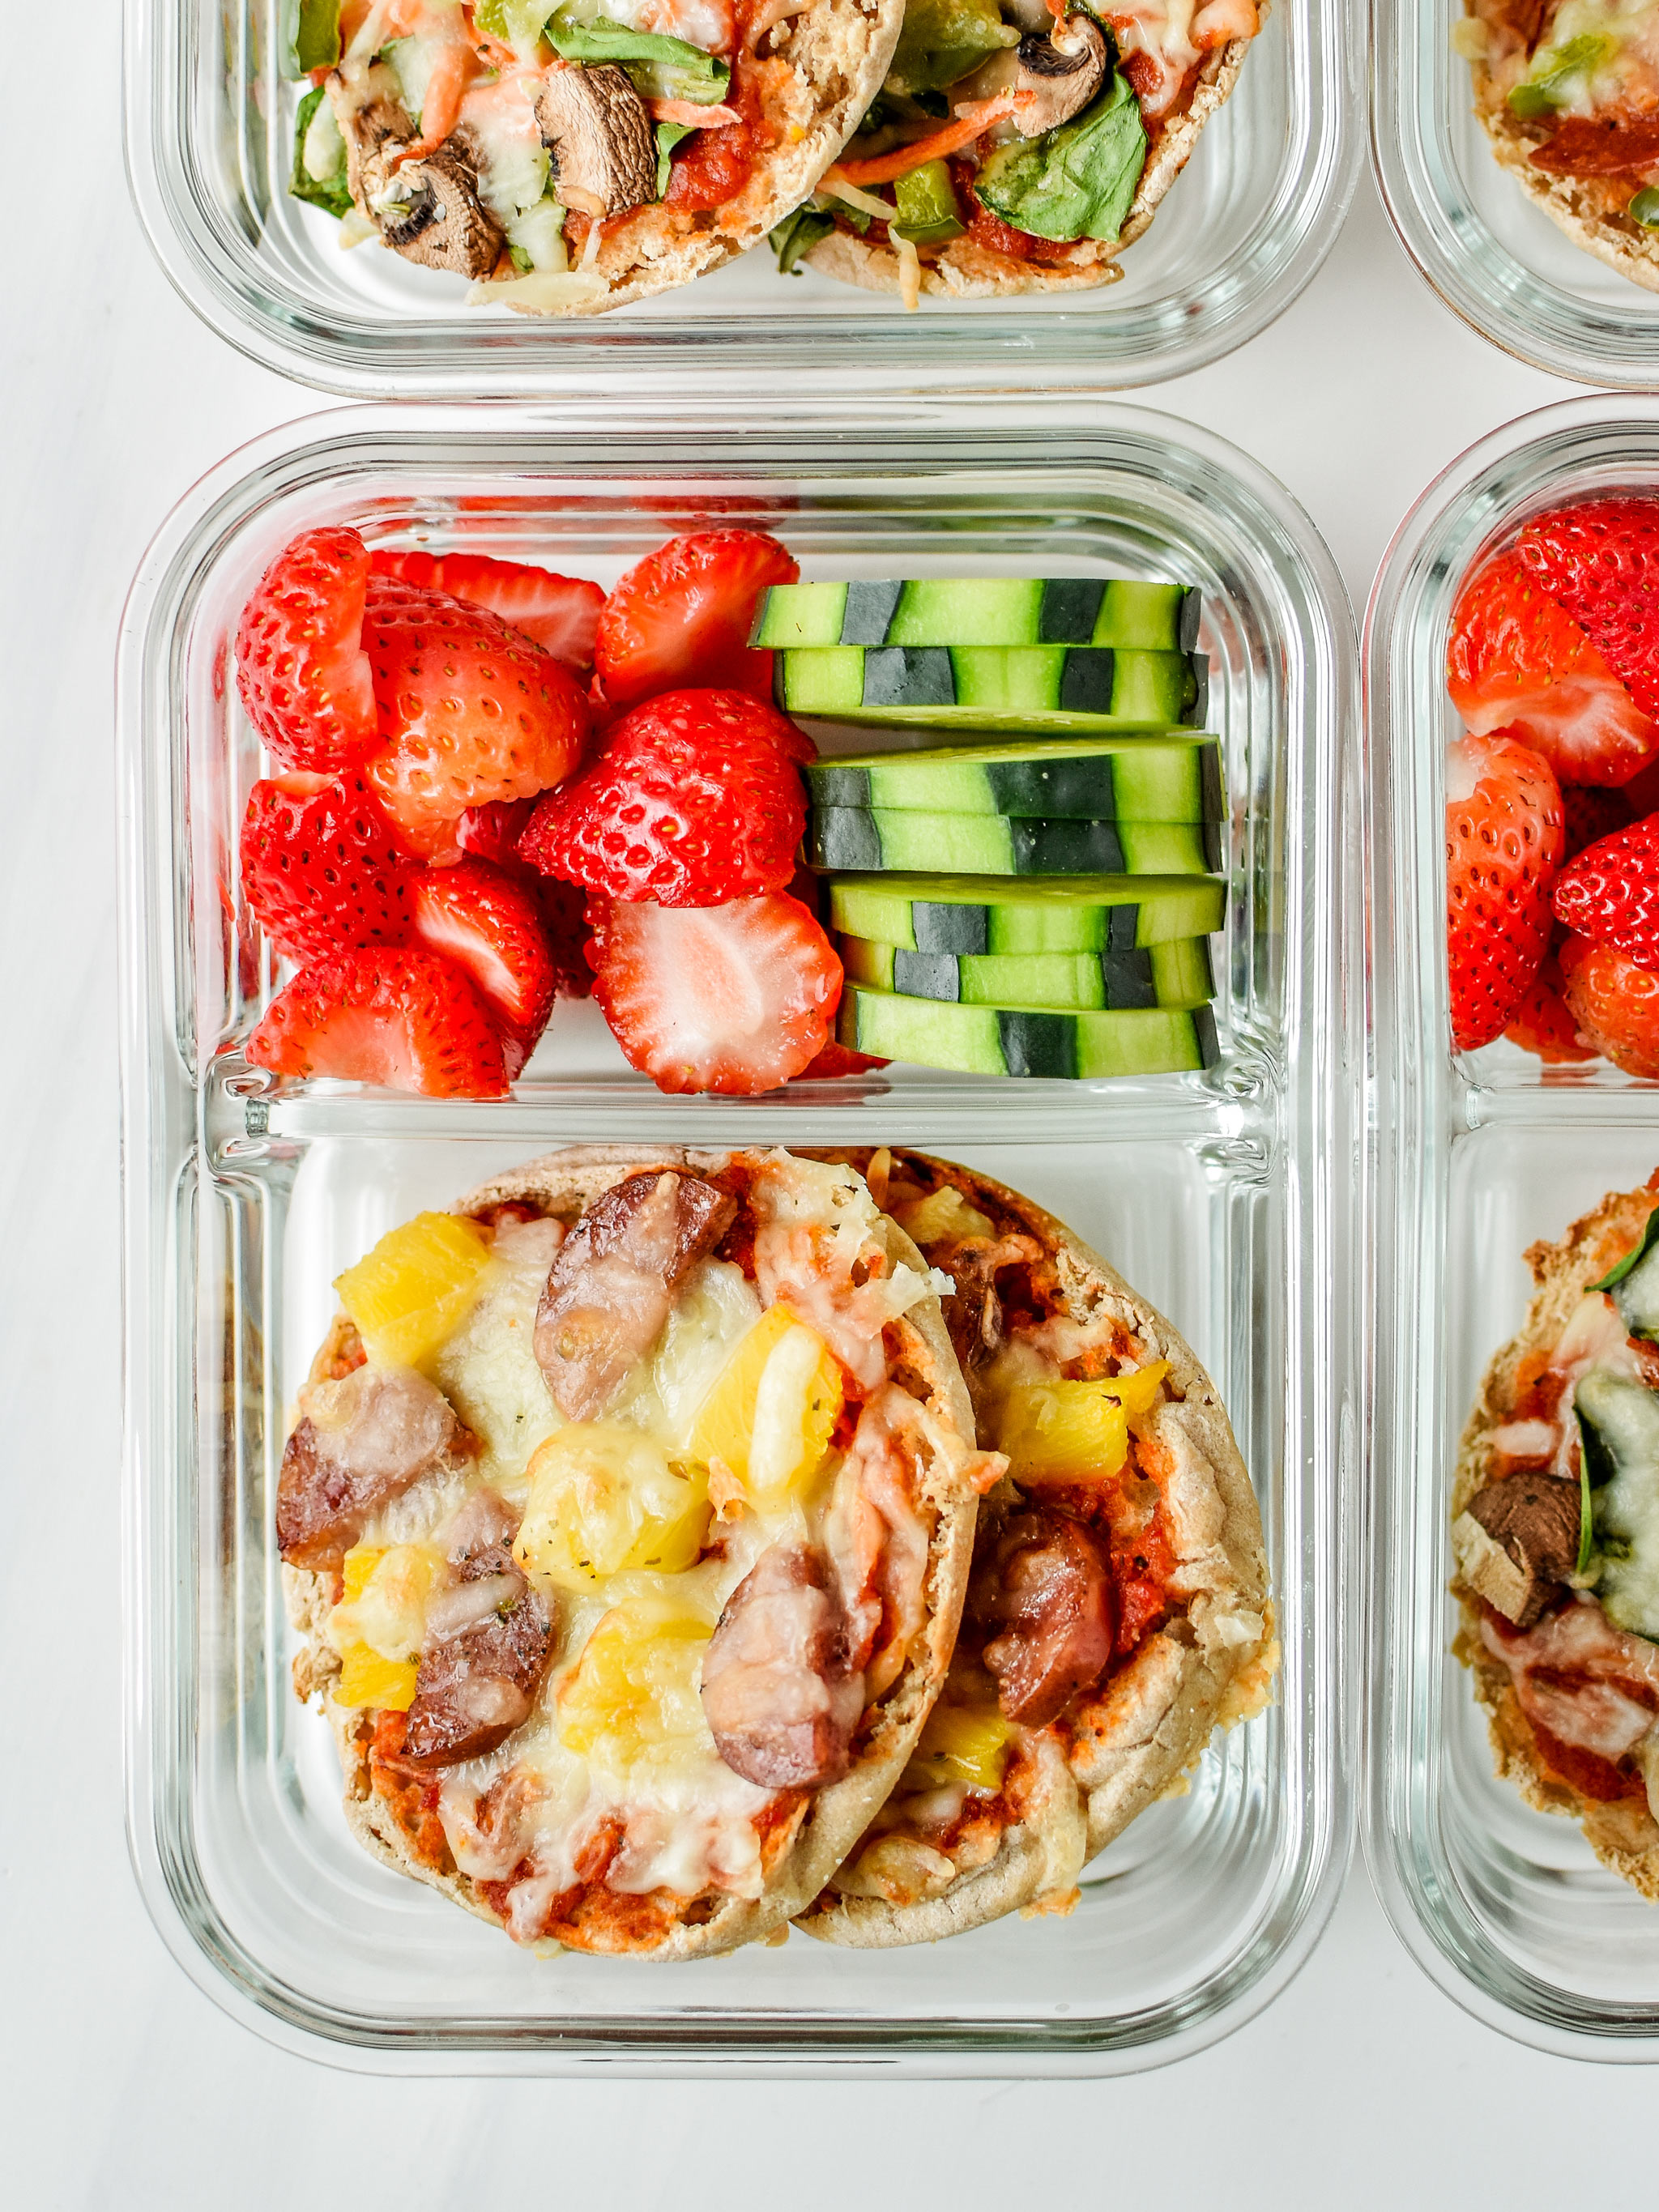 English muffin mini pizzas meal prep - meaty pineapple pictured with fresh cut cucumbers and strawberries